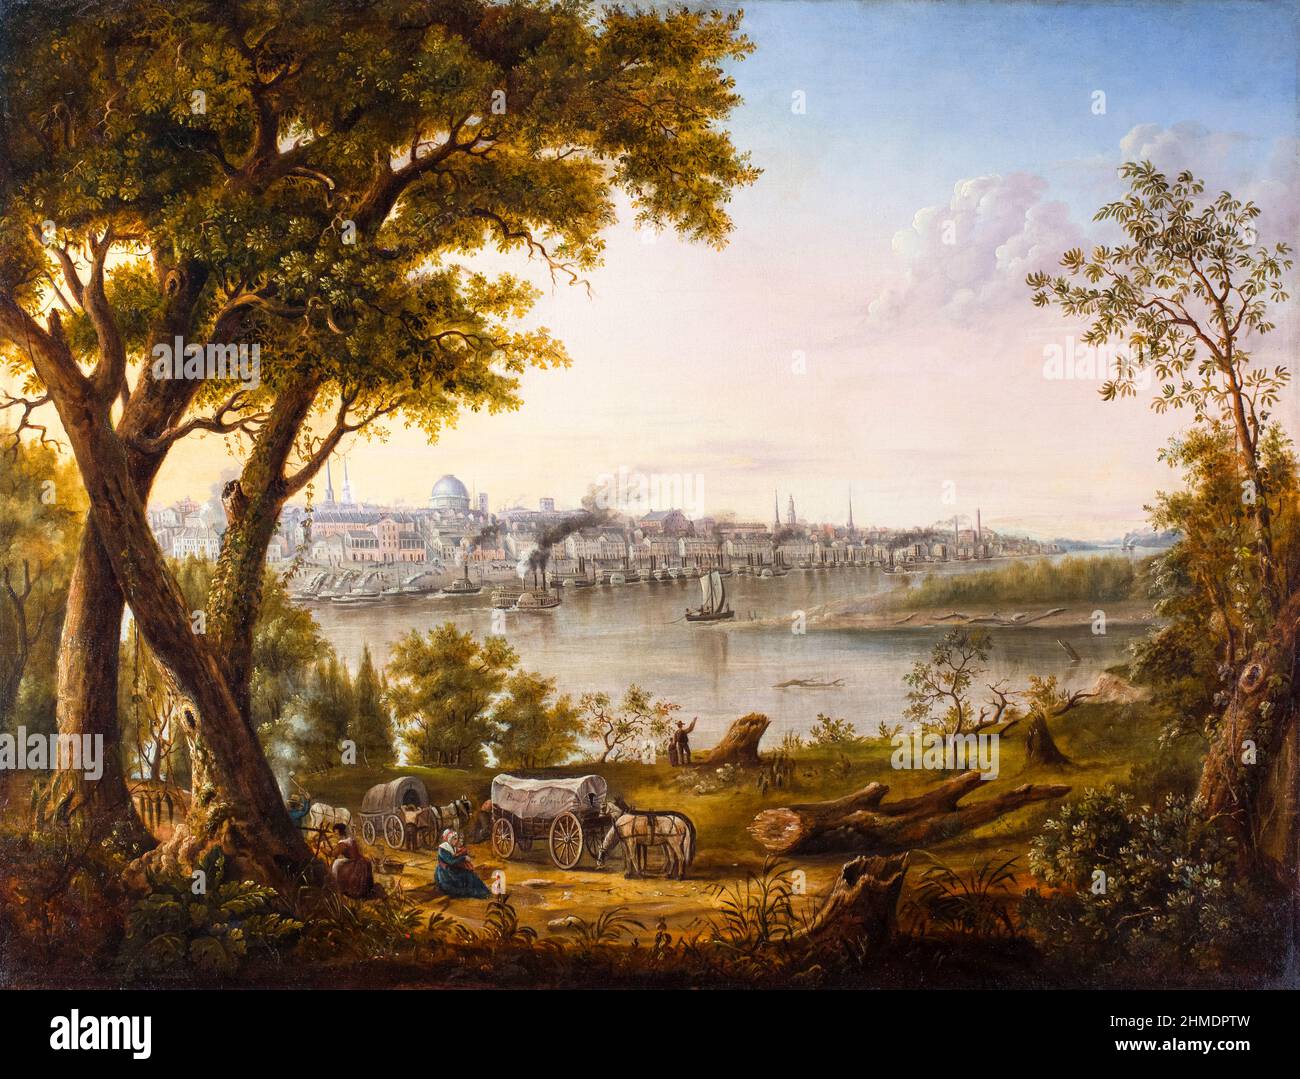 Saint Louis in 1846, cityscape painting by Henry Lewis, 1846 Stock Photo